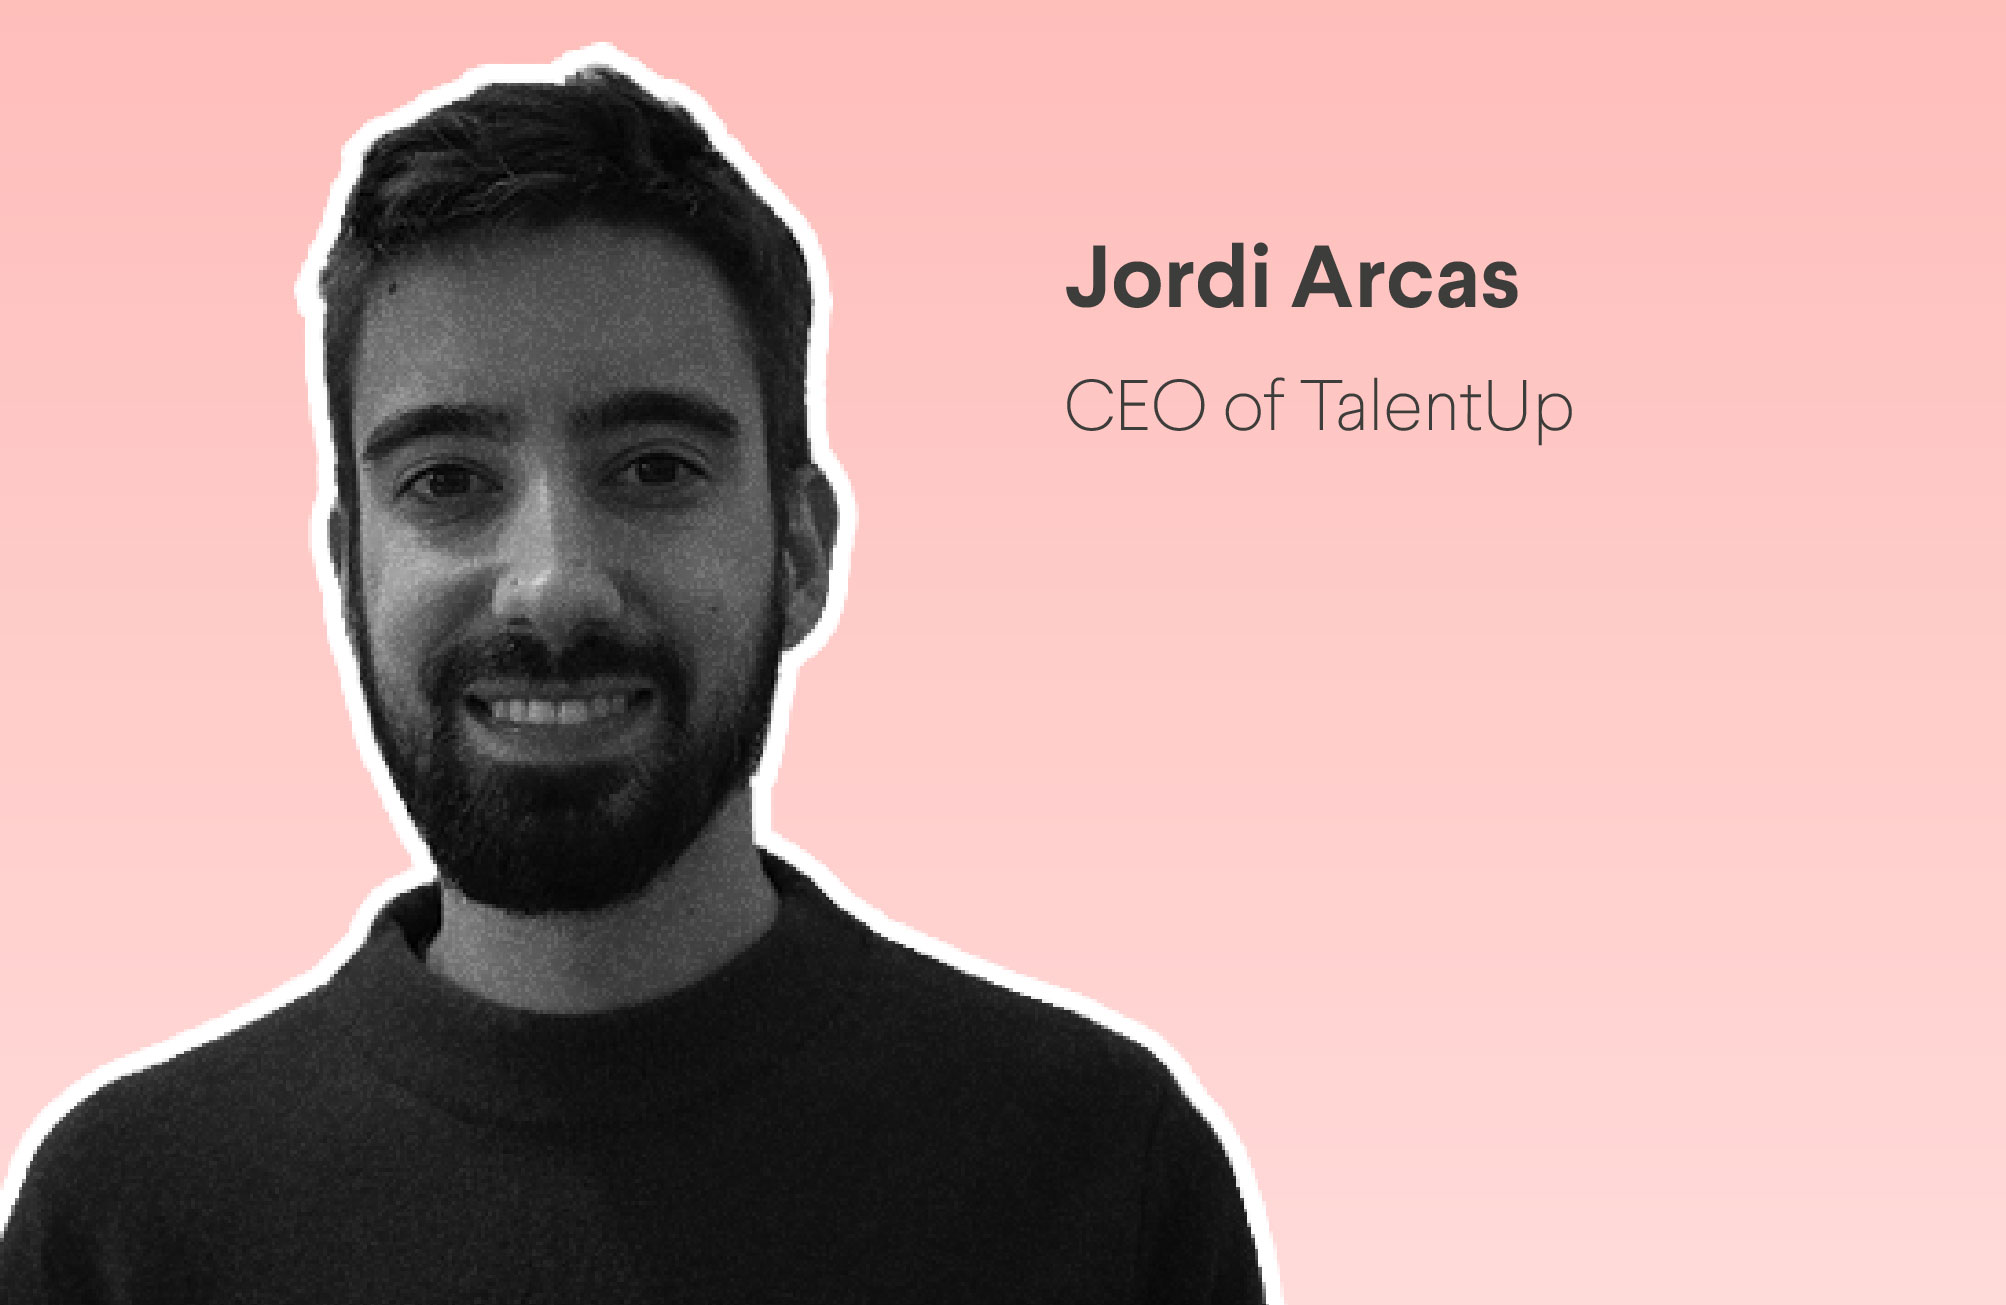 Jordi Arcas: “We expect a salary increase of 10%.”